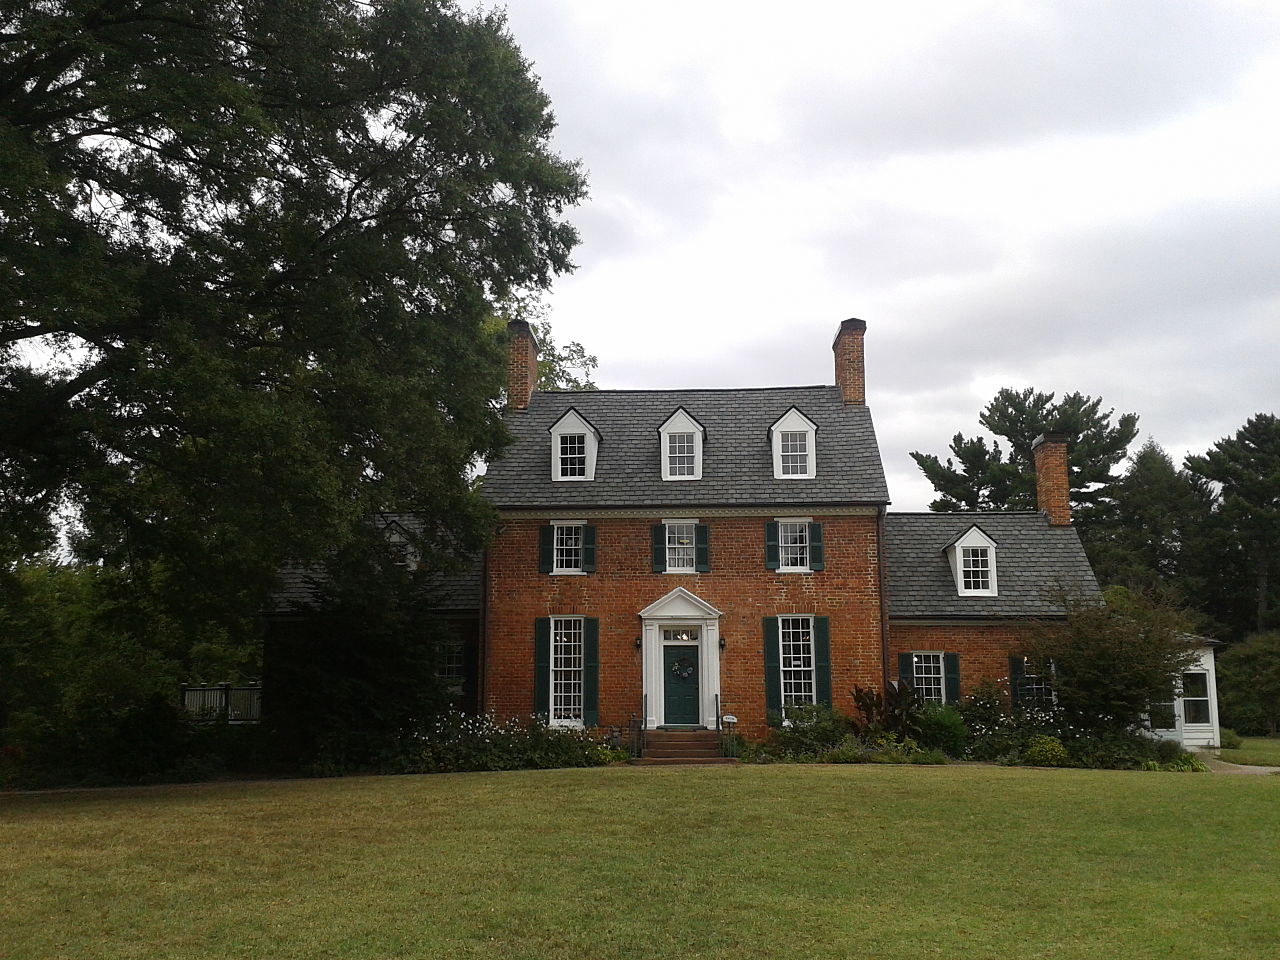 Green Spring Gardens is a historic former plantation that is now a public park. The house was built in 1784 and is one of the few surviving homes of the period in the county.